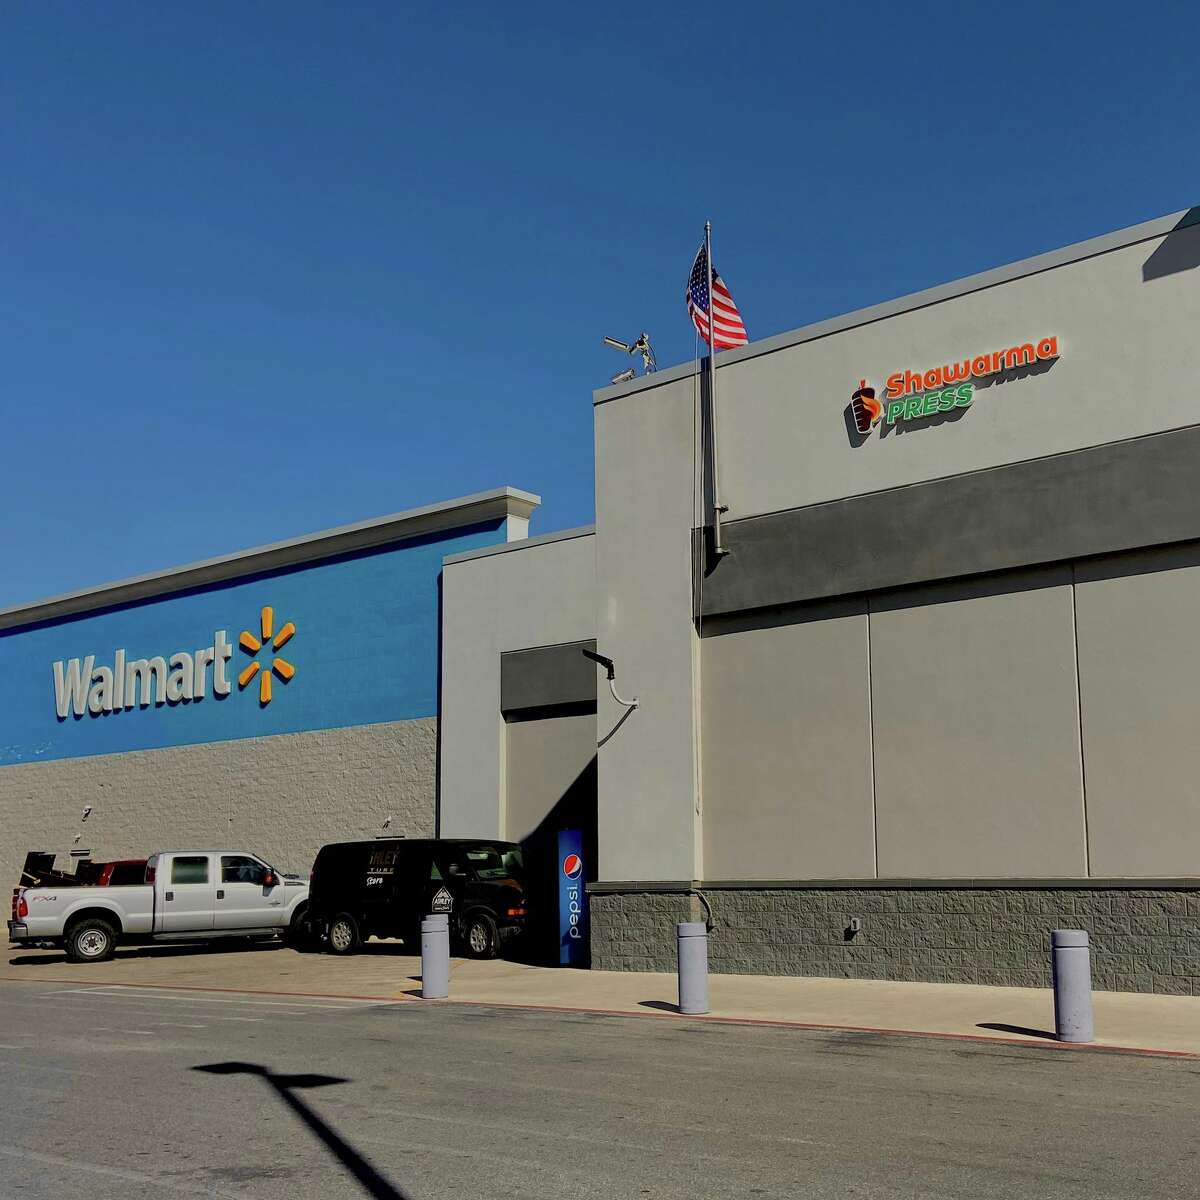 Shawarma Press opened its first location within Walmart stores in San Antonio. Additional locations at Walmart stores planned throughout the state include Arlington, Plano, Georgetown, Frisco, and Mansfield.